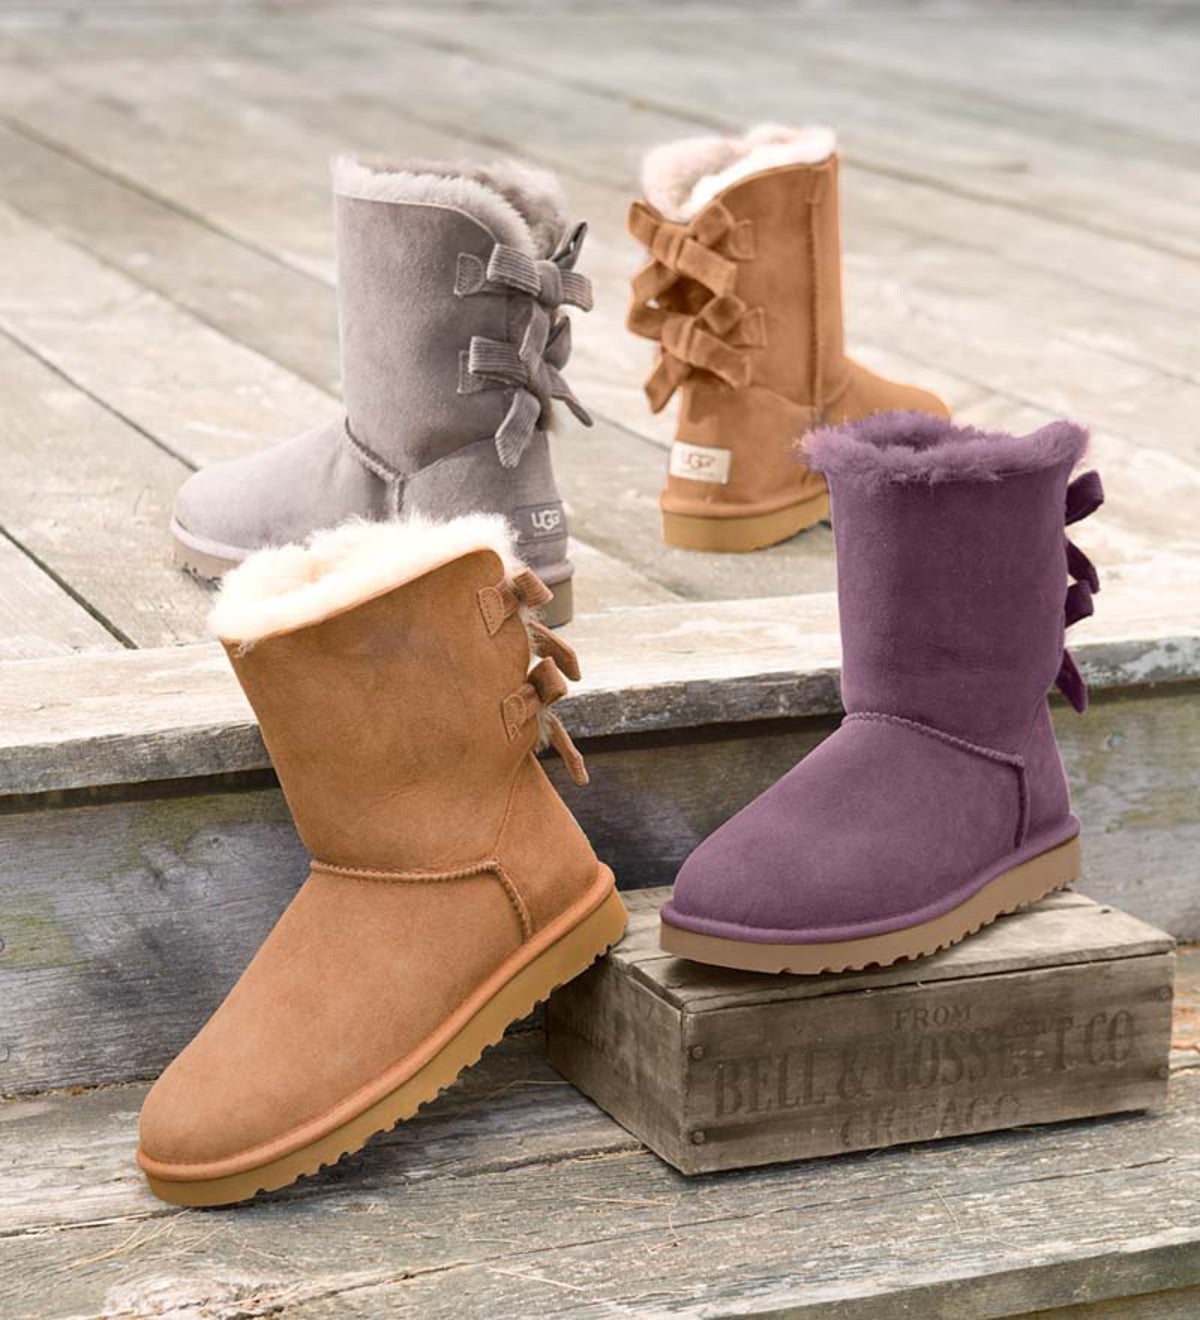 uggs with corduroy bows